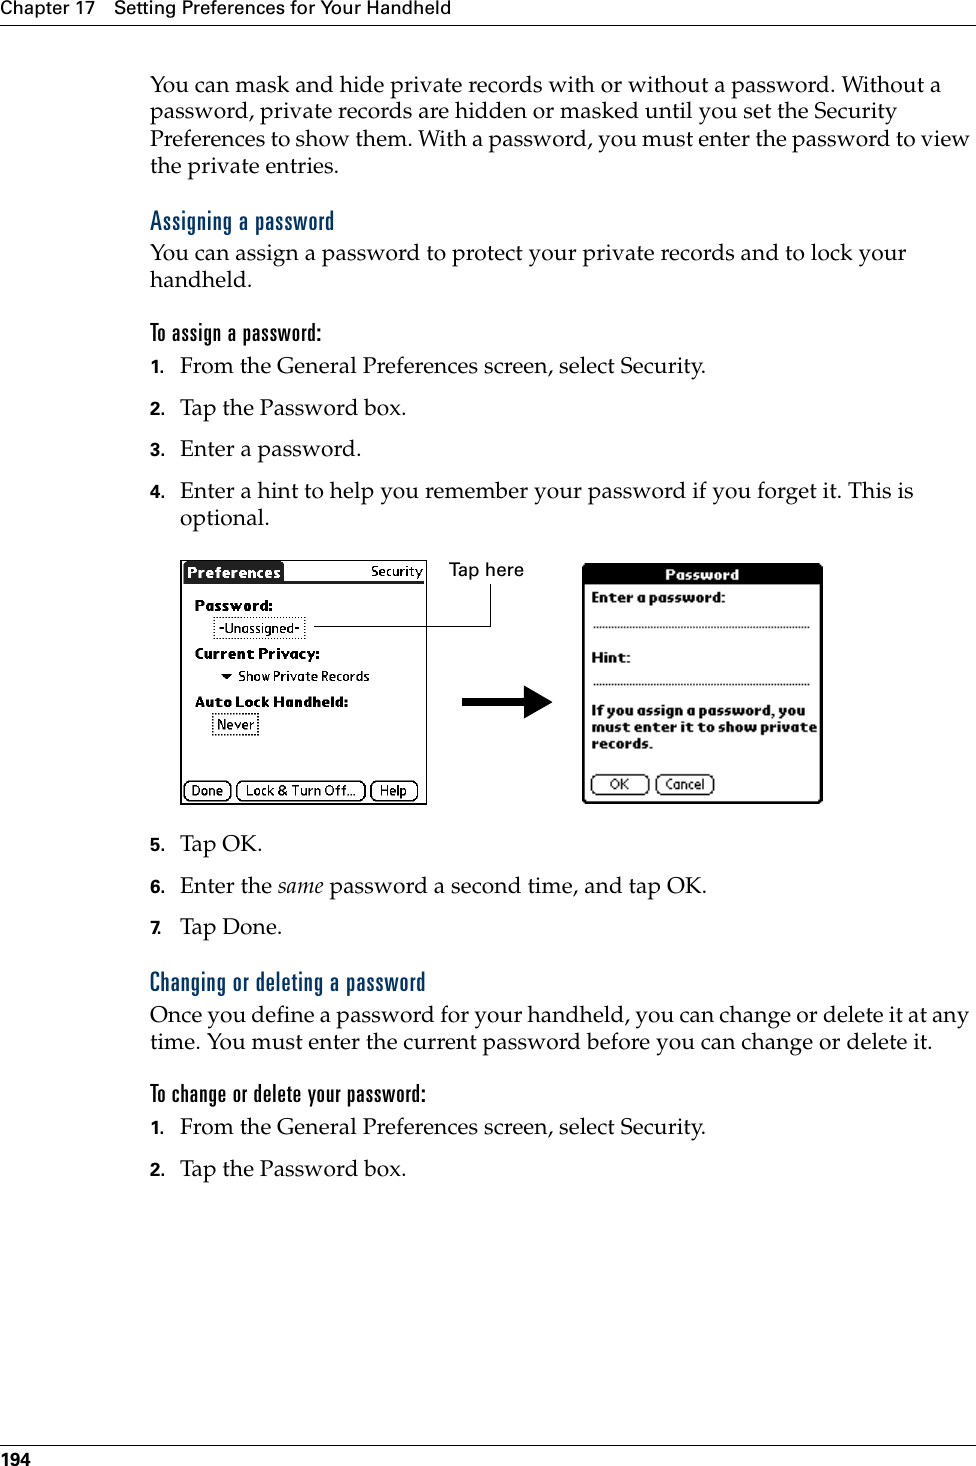 Chapter 17 Setting Preferences for Your Handheld194You can mask and hide private records with or without a password. Without a password, private records are hidden or masked until you set the Security Preferences to show them. With a password, you must enter the password to view the private entries. Assigning a passwordYou can assign a password to protect your private records and to lock your handheld.To assign a password:1. From the General Preferences screen, select Security.2. Tap the Password box.3. Enter a password. 4. Enter a hint to help you remember your password if you forget it. This is optional.5. Tap OK. 6. Enter the same password a second time, and tap OK.7. Tap Don e.Changing or deleting a passwordOnce you define a password for your handheld, you can change or delete it at any time. You must enter the current password before you can change or delete it.To change or delete your password:1. From the General Preferences screen, select Security.2. Tap the Password box.Tap herePalm, Inc. Confidential